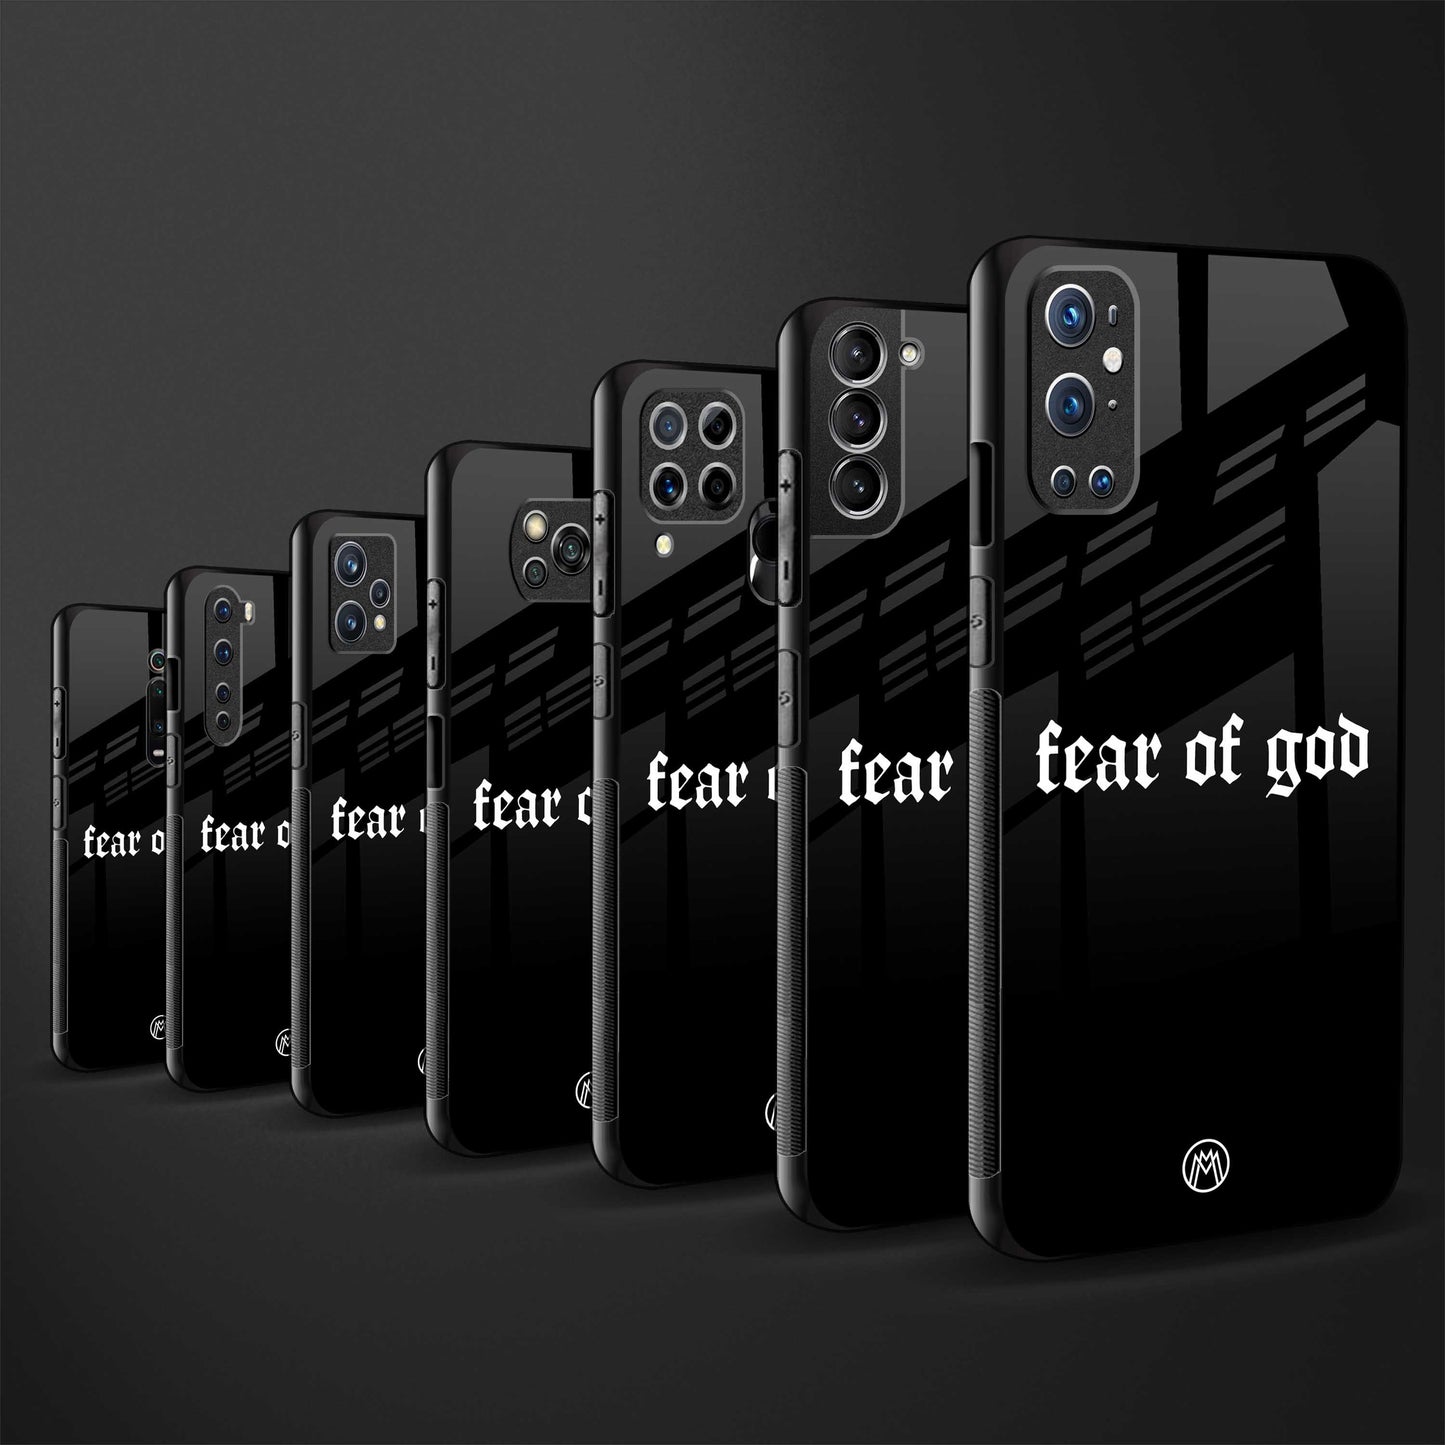 fear of god phone cover for vivo y20